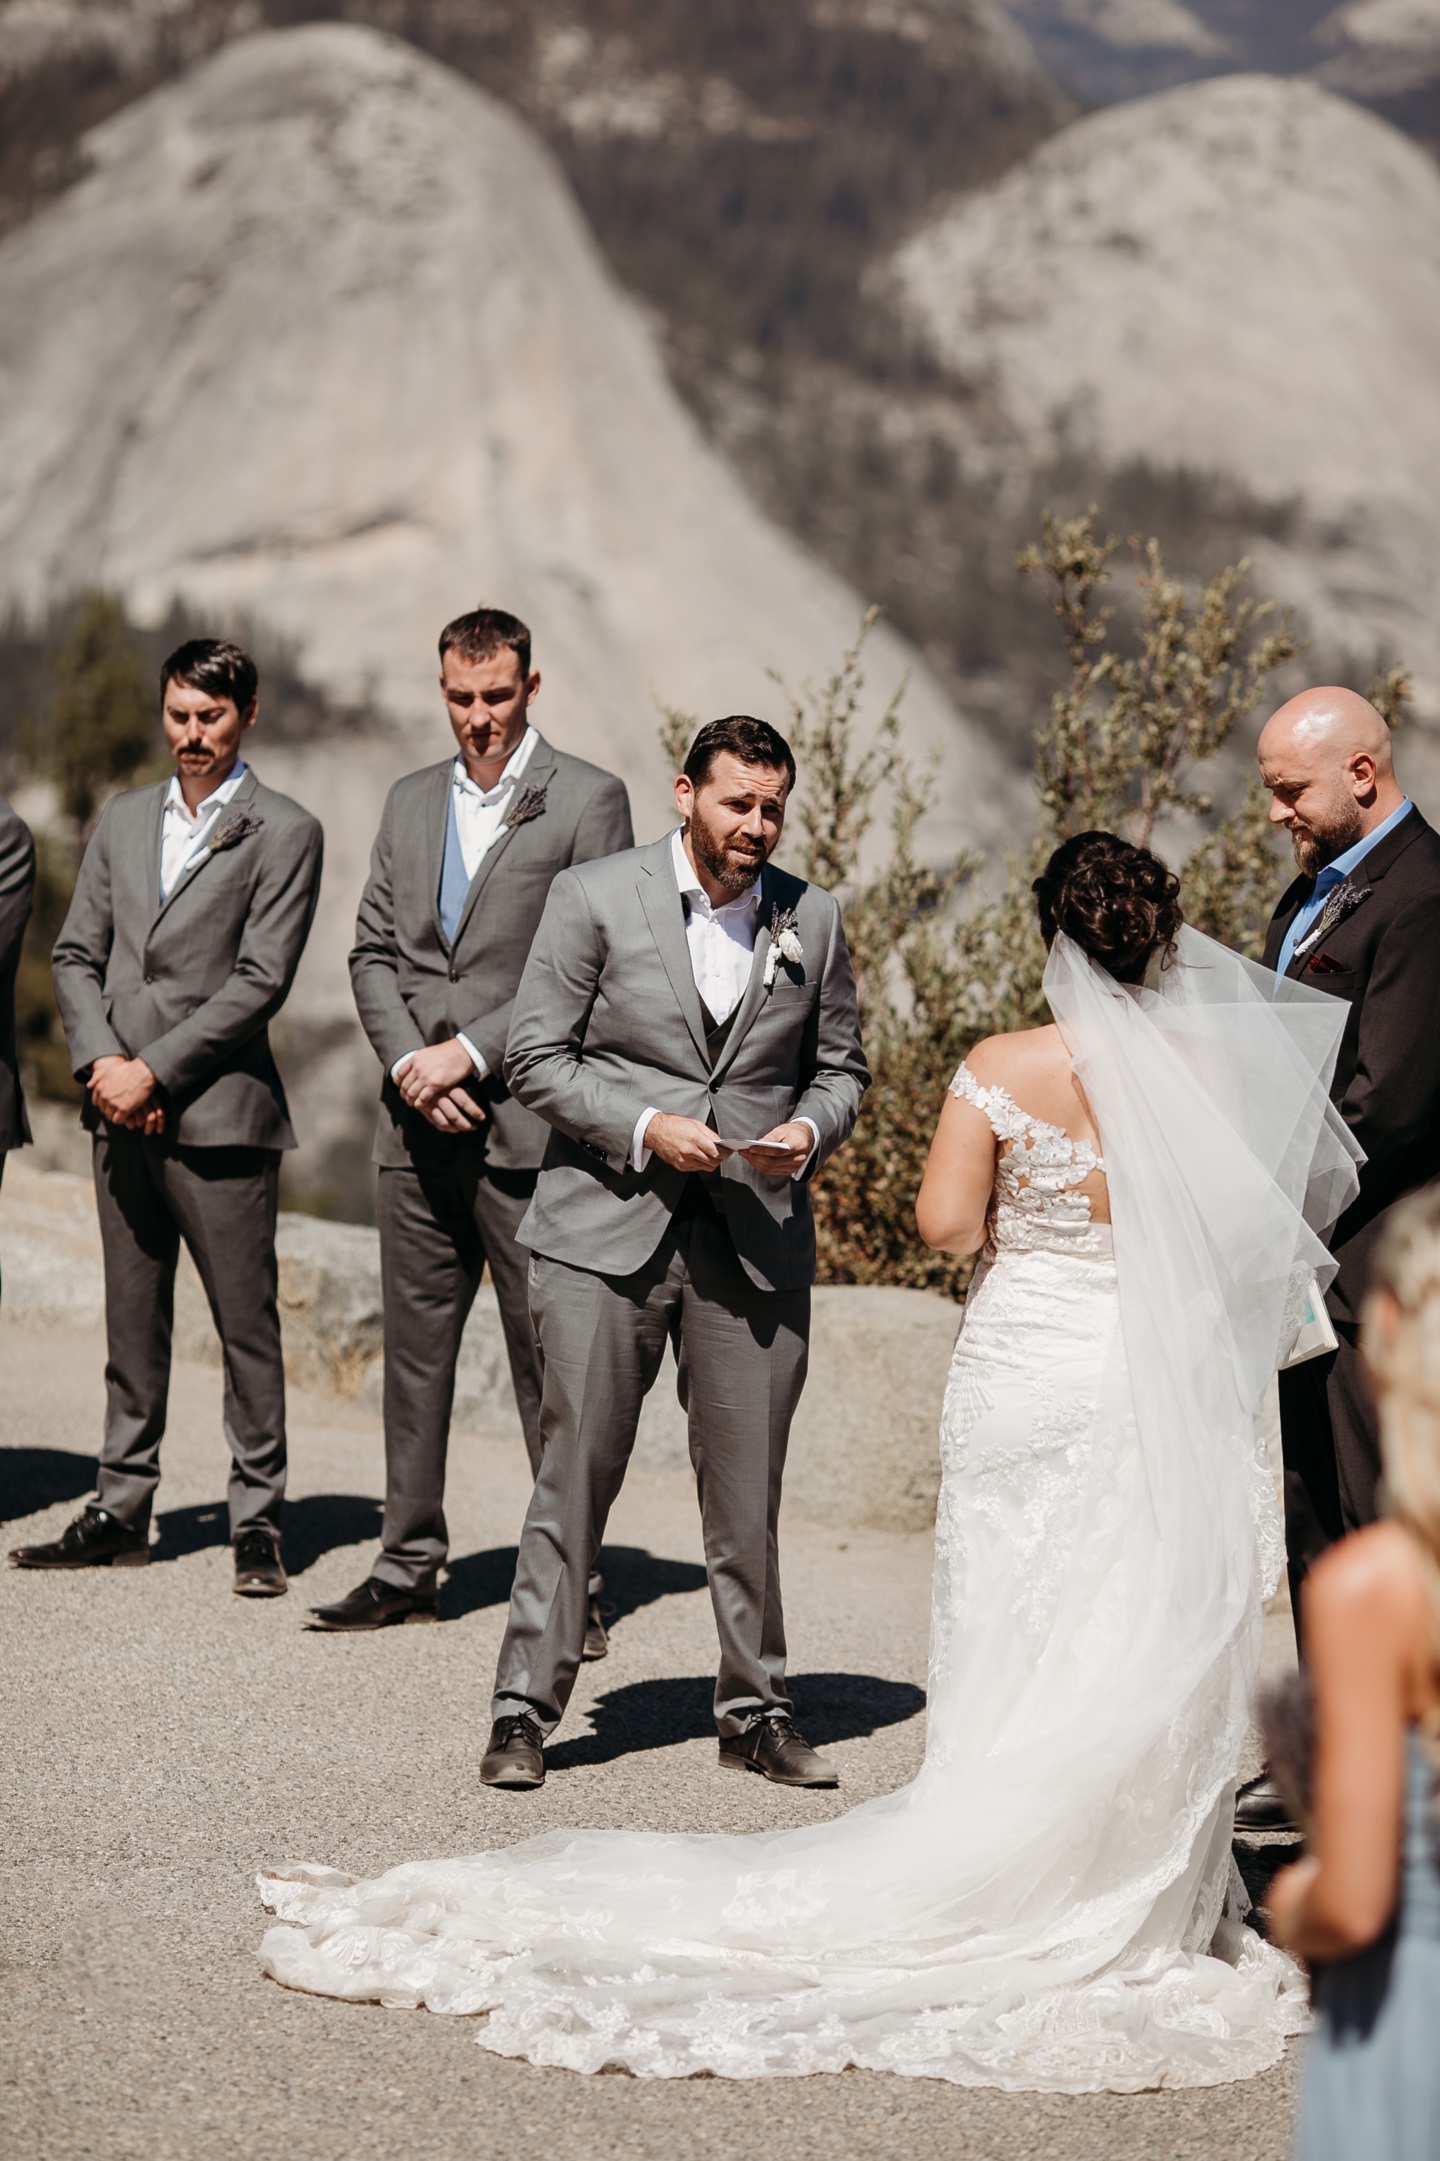 Groom reads his vows to the bride during their Yosemite wedding ceremony.